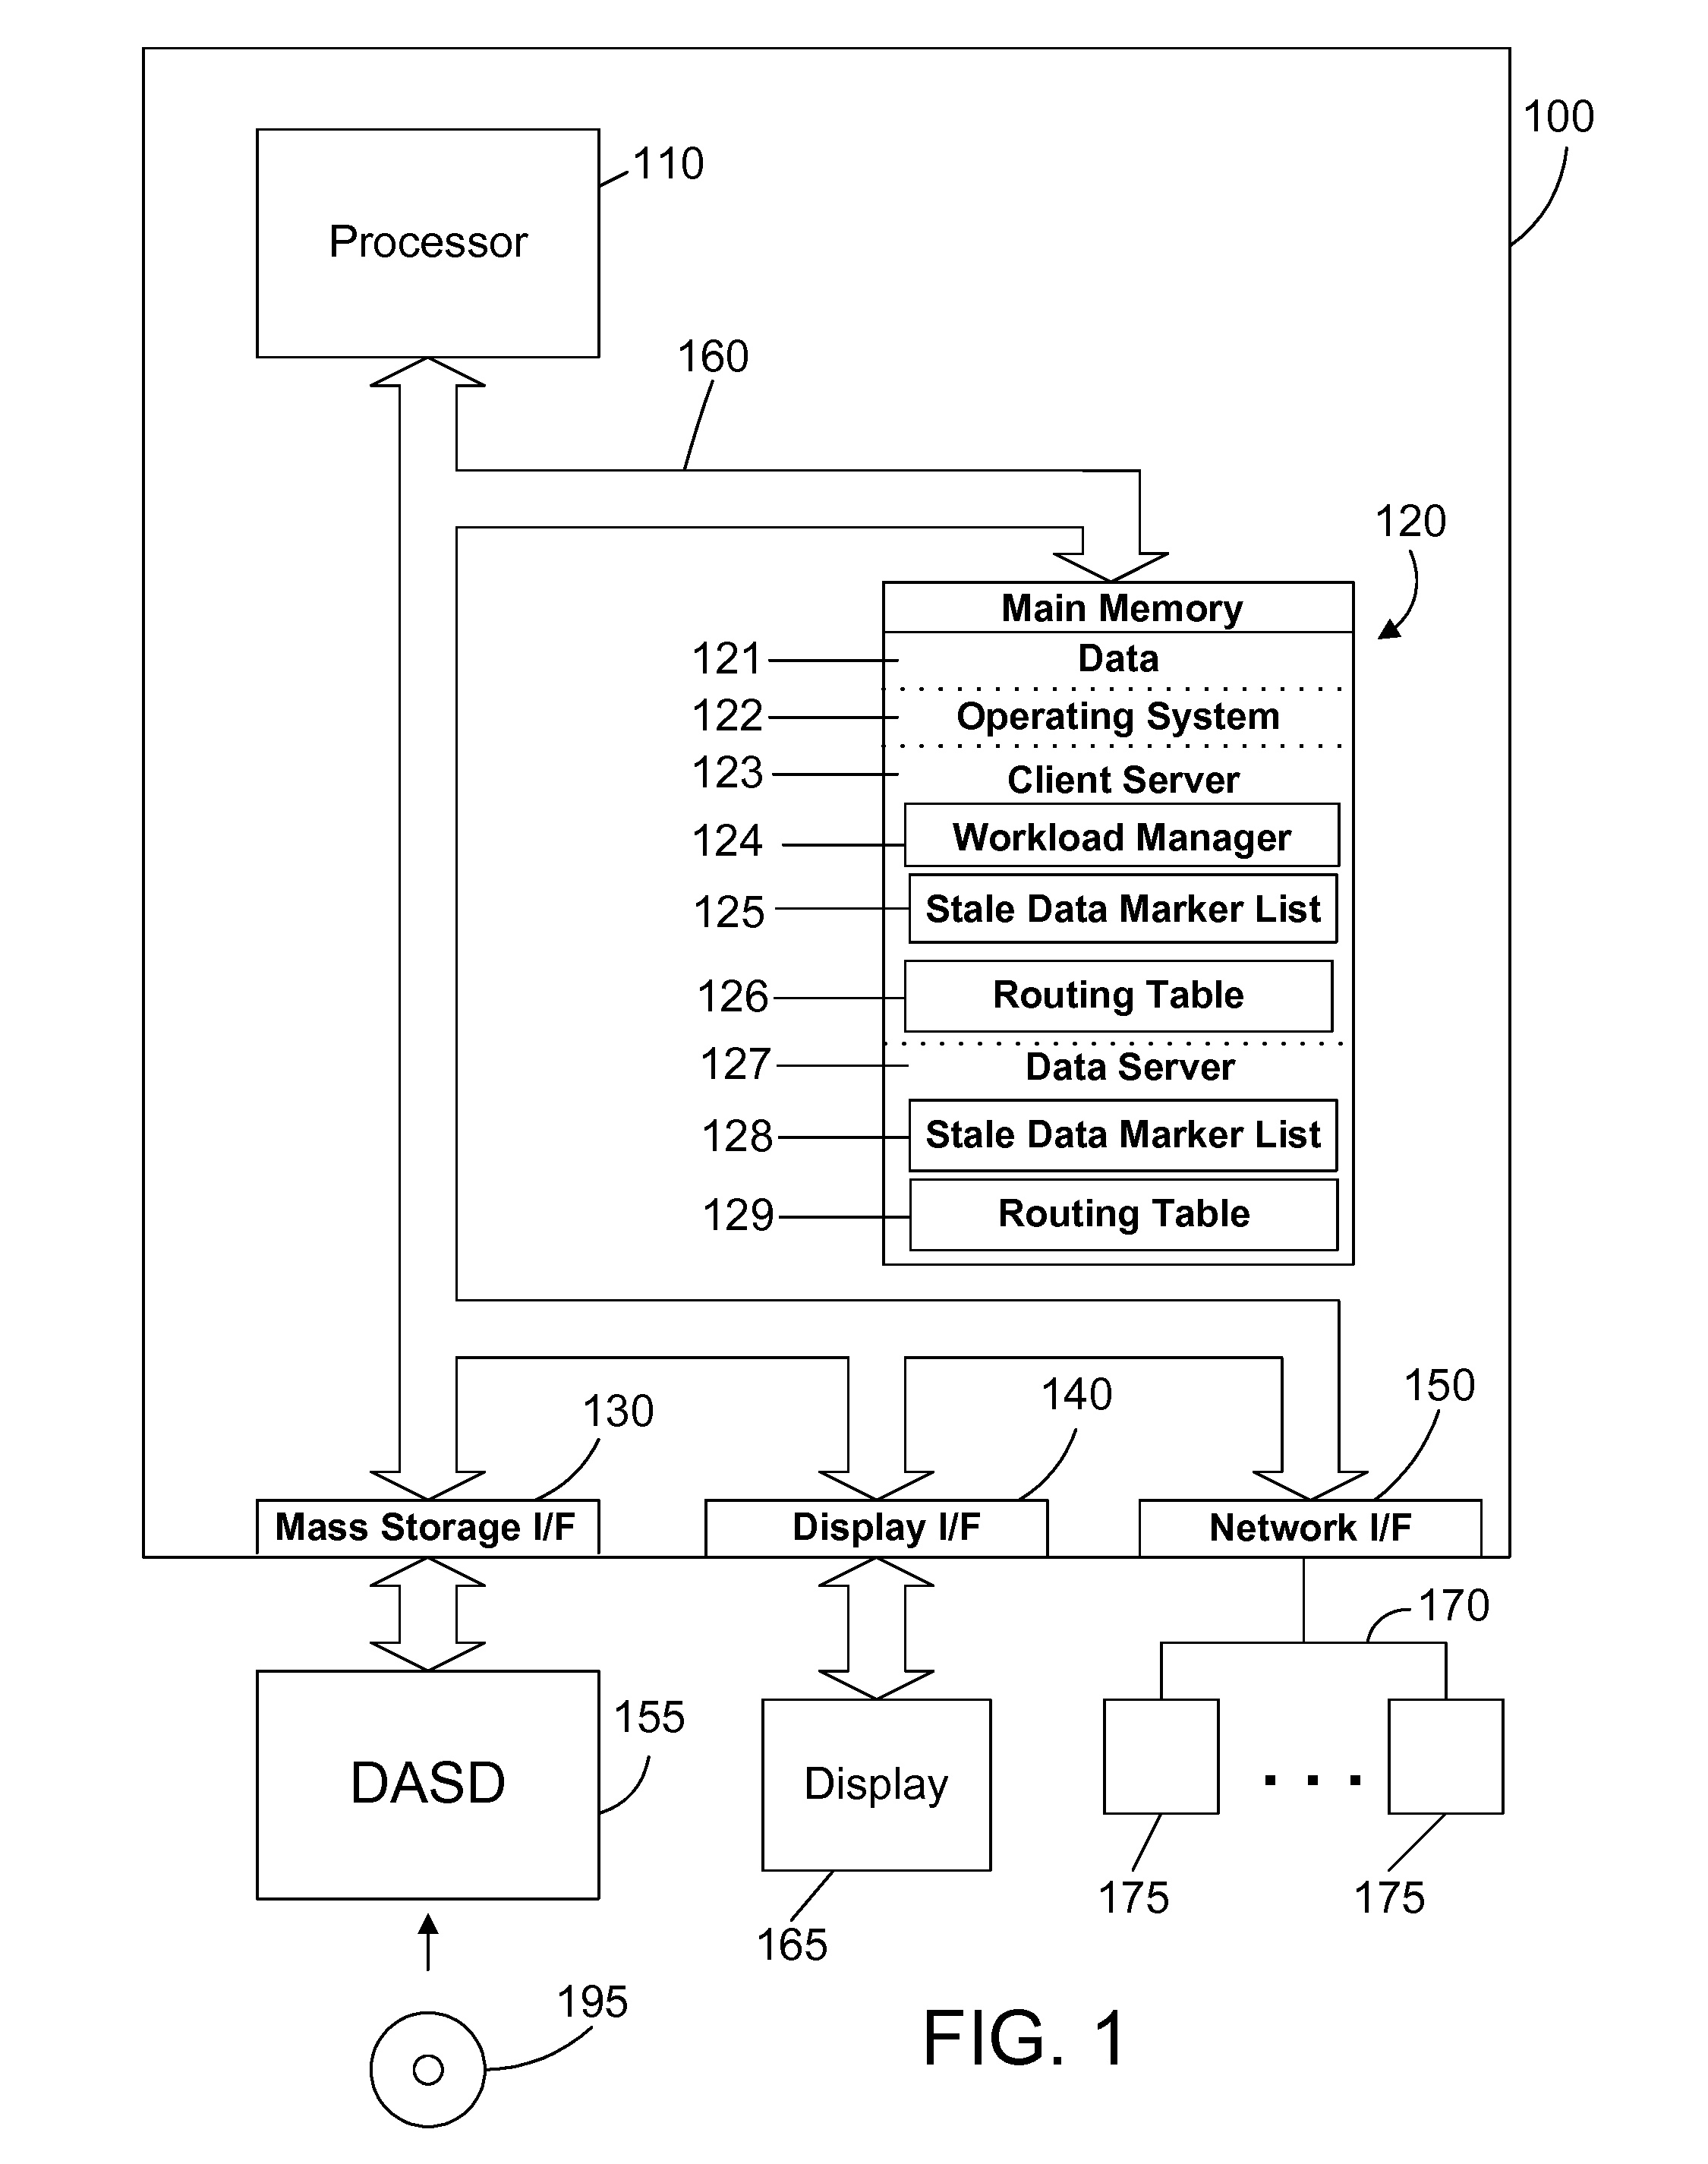 Apparatus and Method for Efficient Handling of Mostly Read Data in a Computer Server